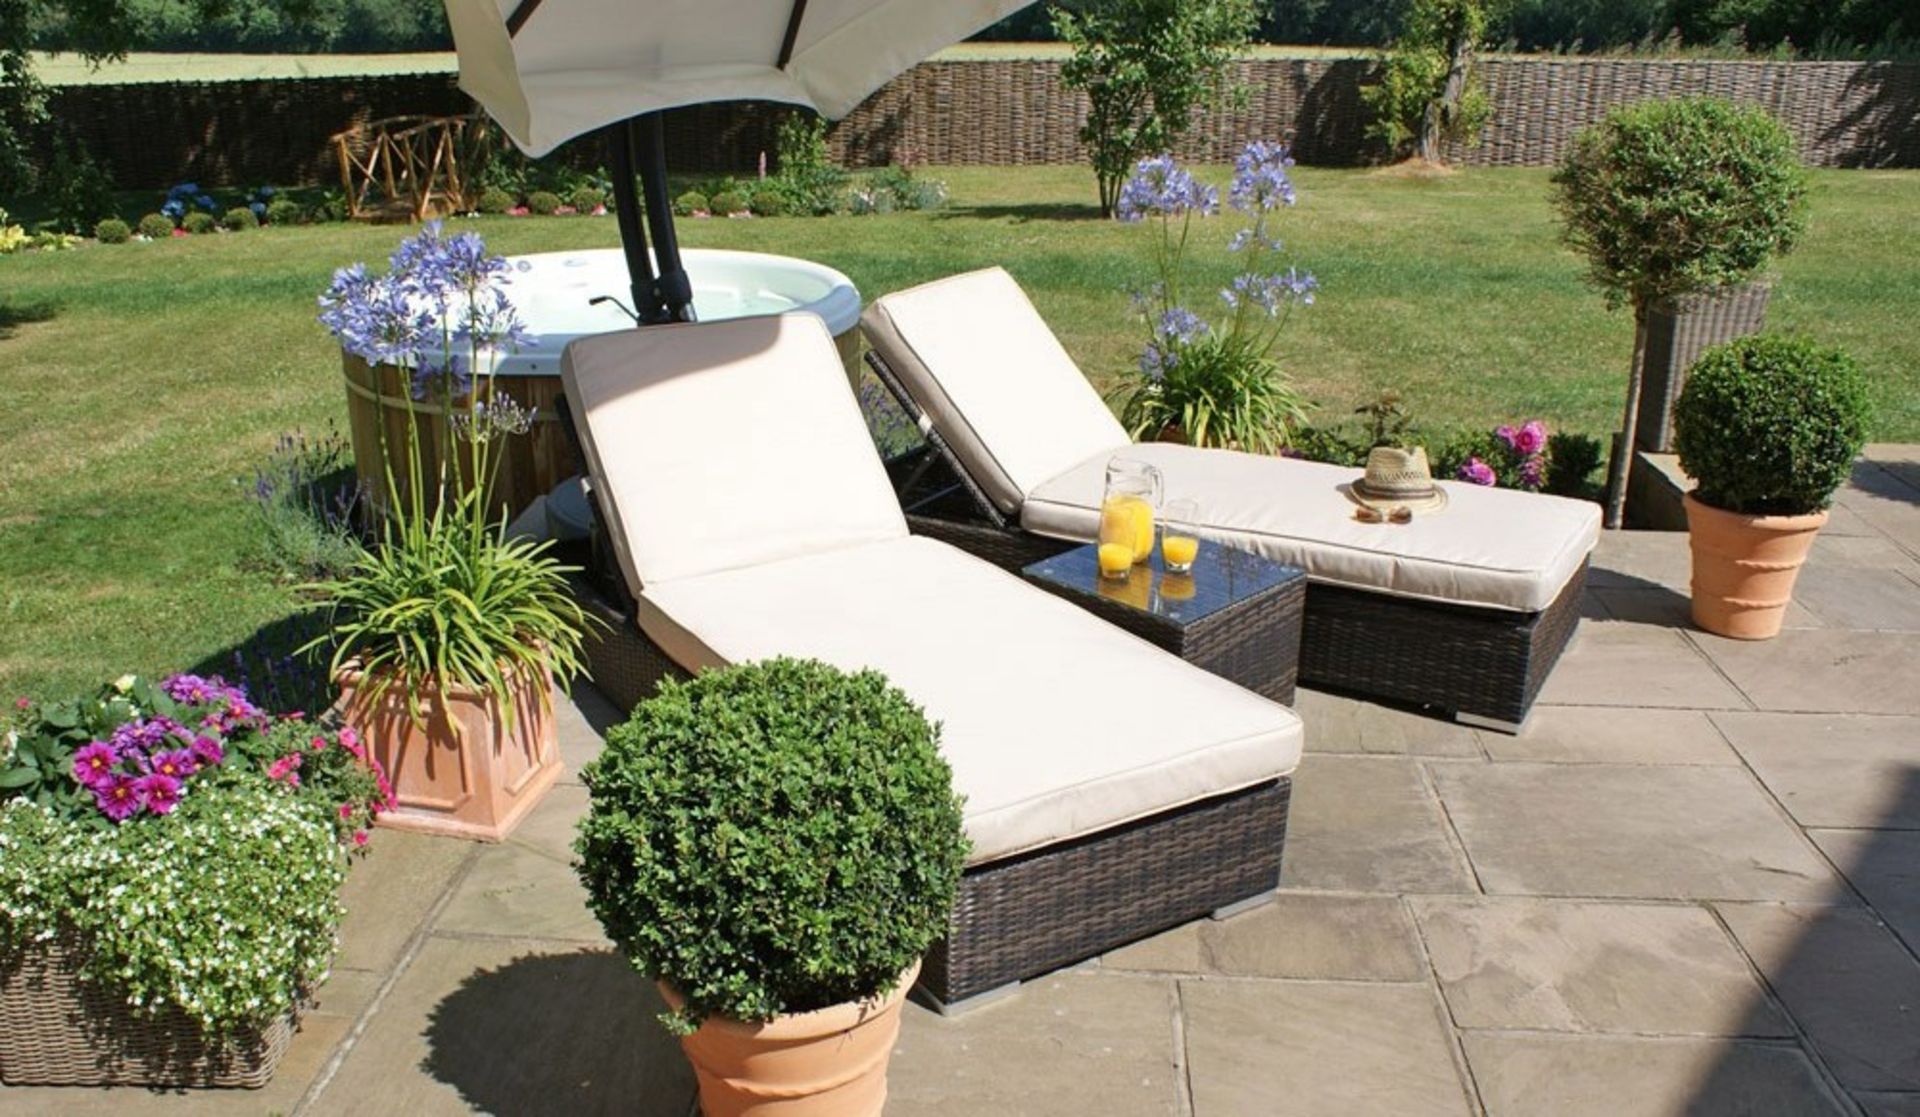 + VAT Brand New Chelsea Garden Company Sunloungers And Table Set-Item Is Available From Approx 3rd